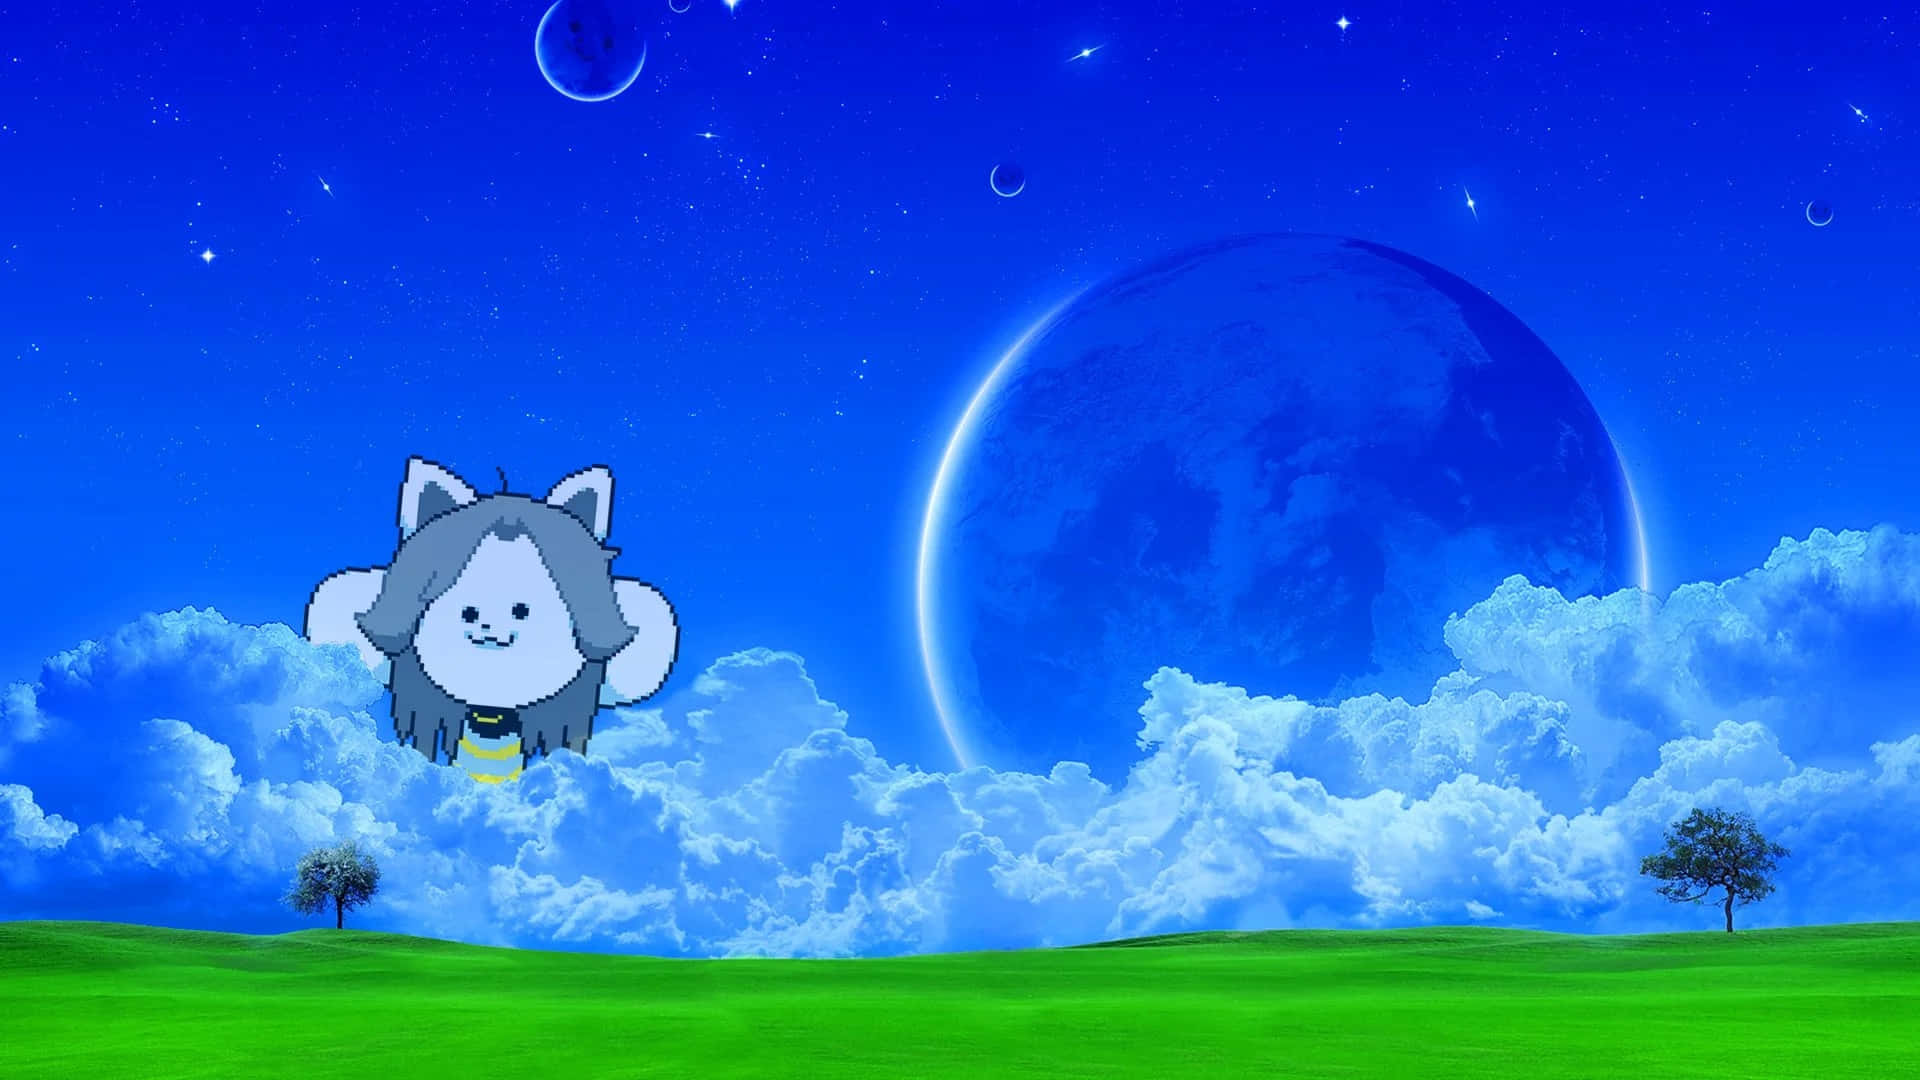 A Cat Flying In The Sky With Clouds And Stars Wallpaper